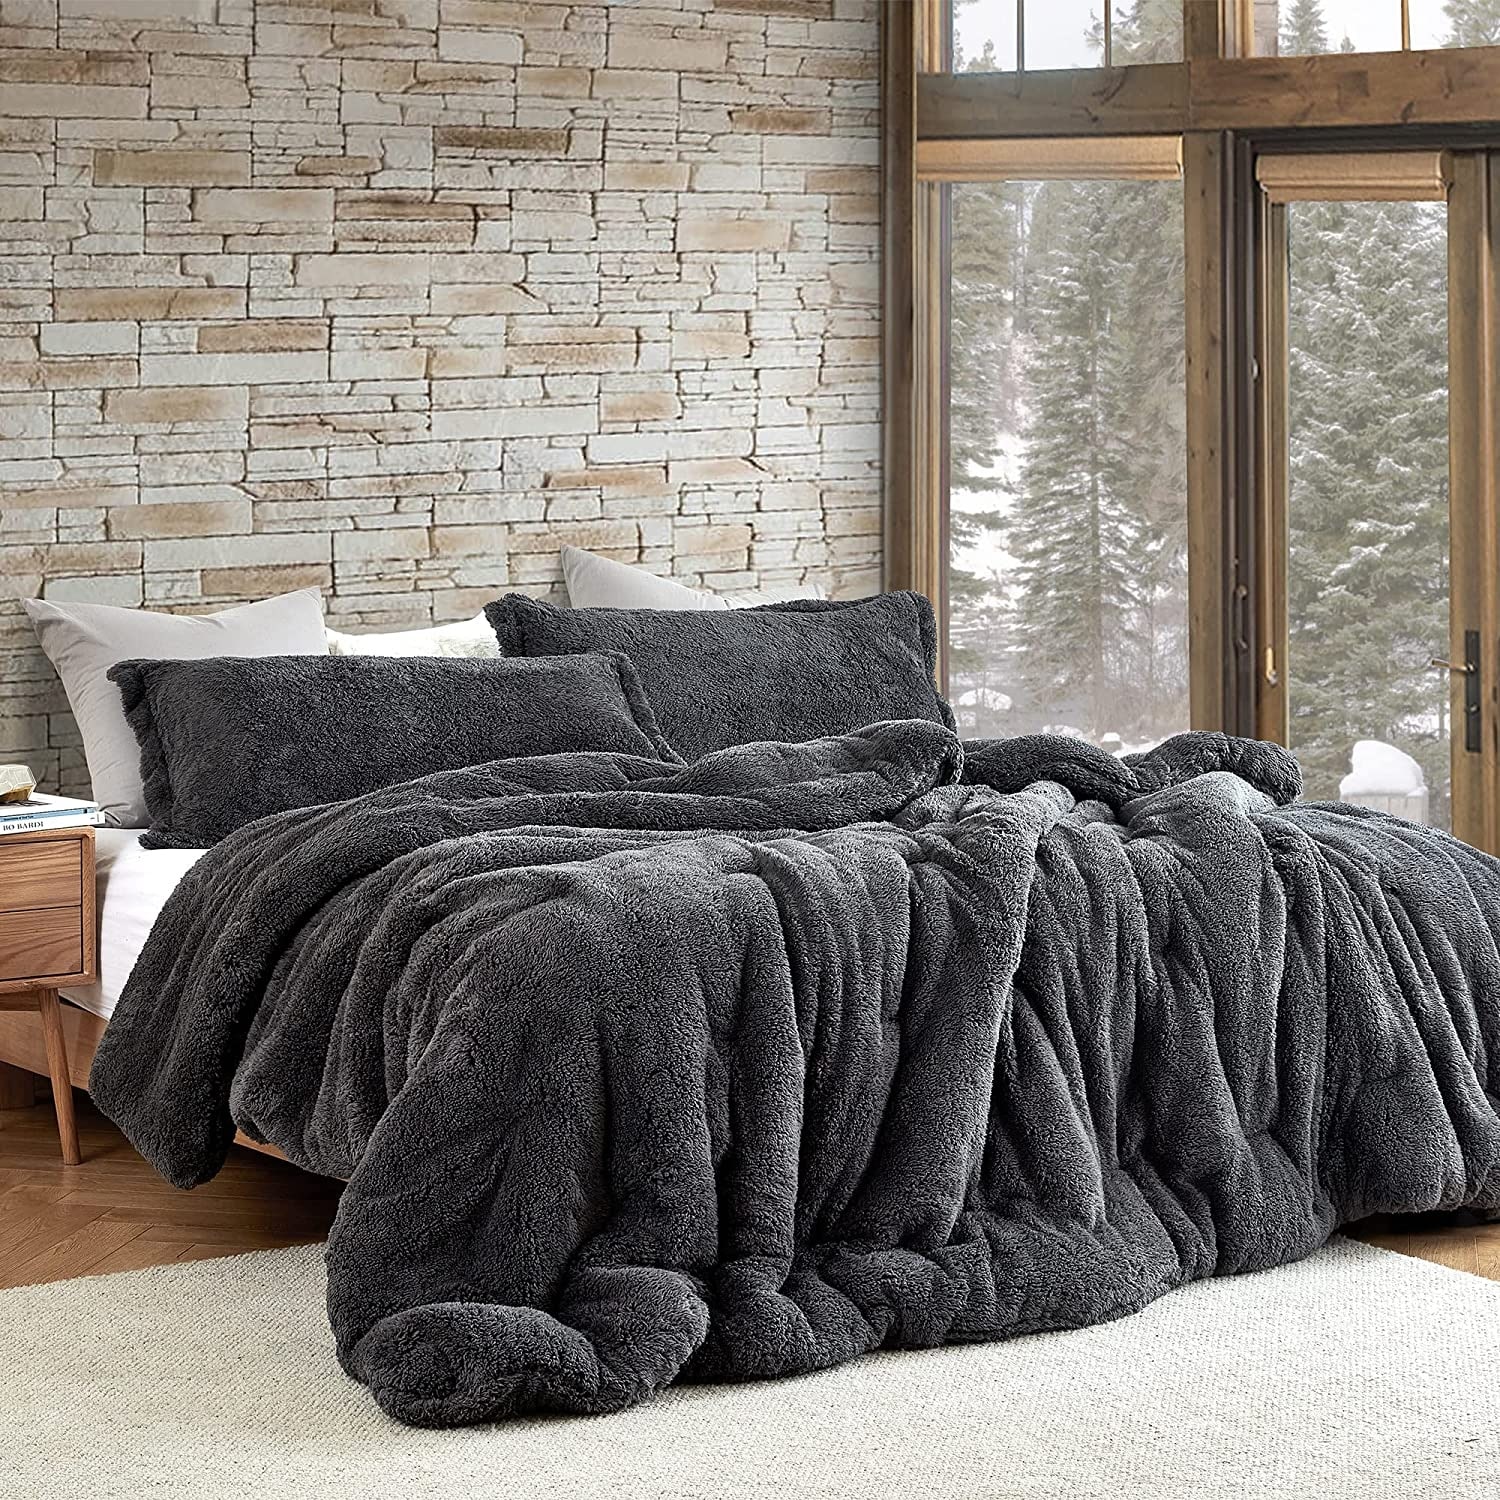 https://ak1.ostkcdn.com/images/products/is/images/direct/f287290558d82a273b8c3e8130a9806b3d707998/BYB-Charcoal-Coma-Inducer-Comforter.jpg